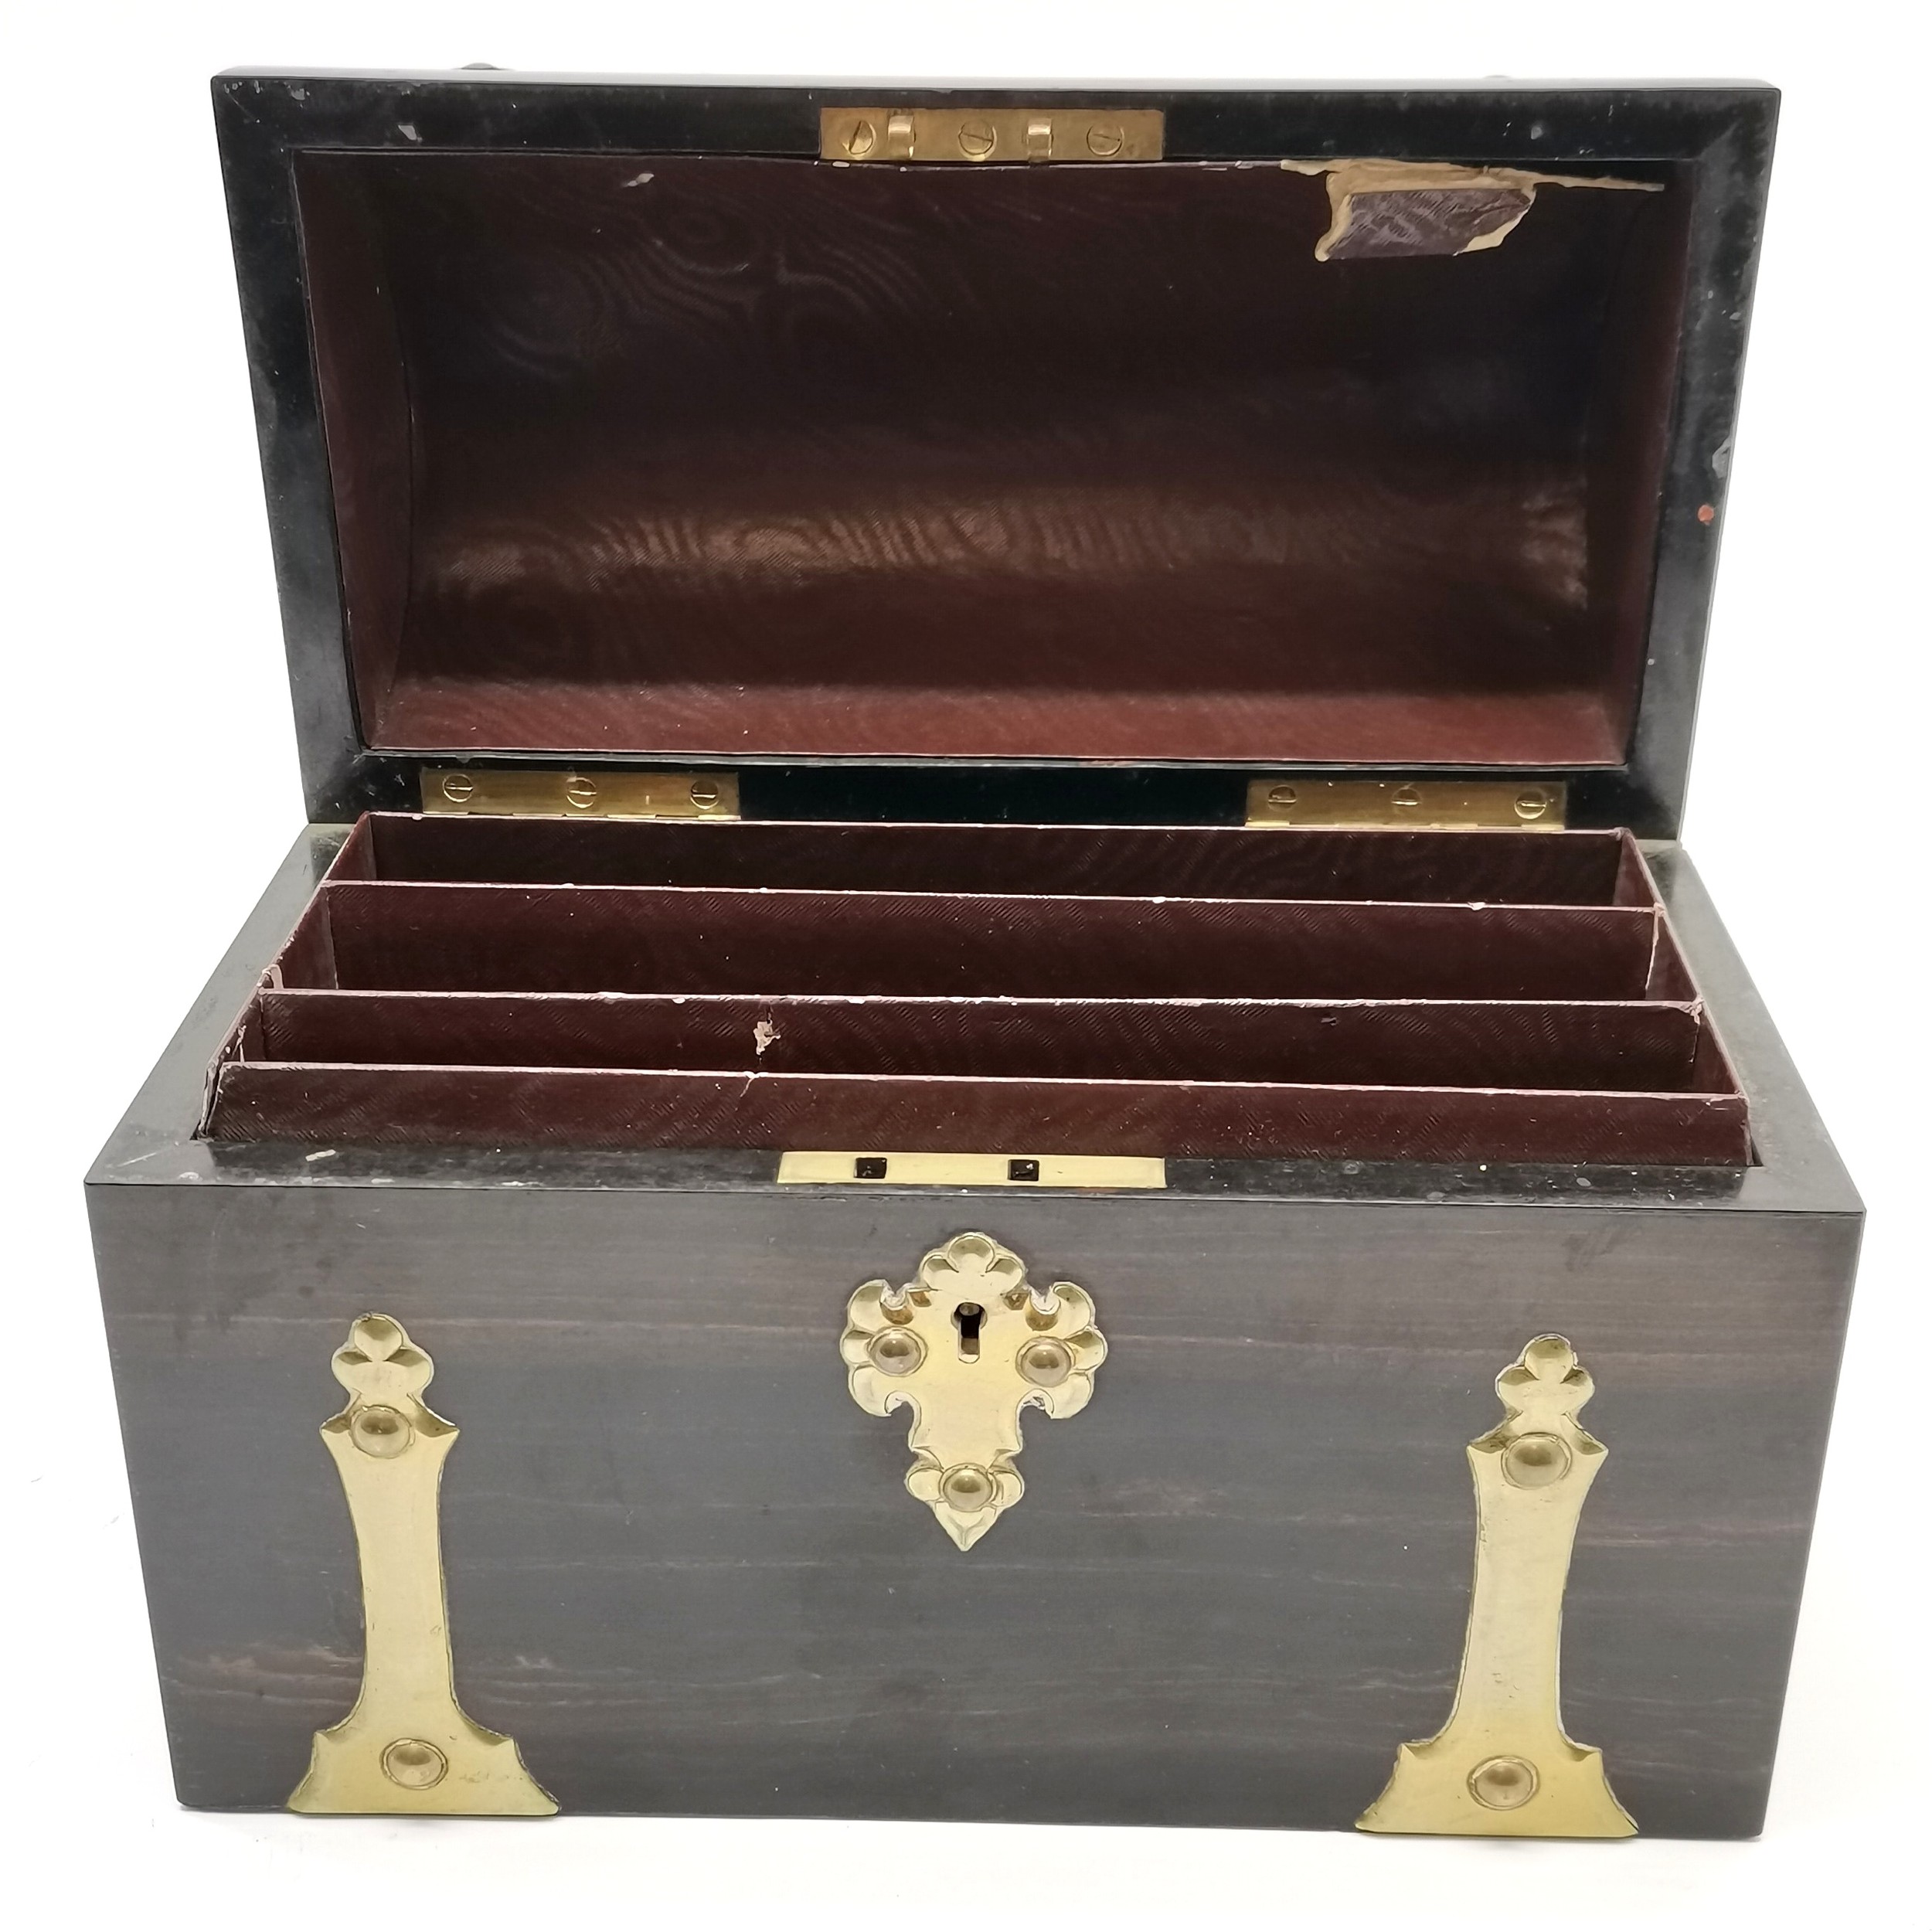 Antique coromandel wooden domed lidded stationery box with brass mounts - 22cm across x 16cm high - Image 2 of 5